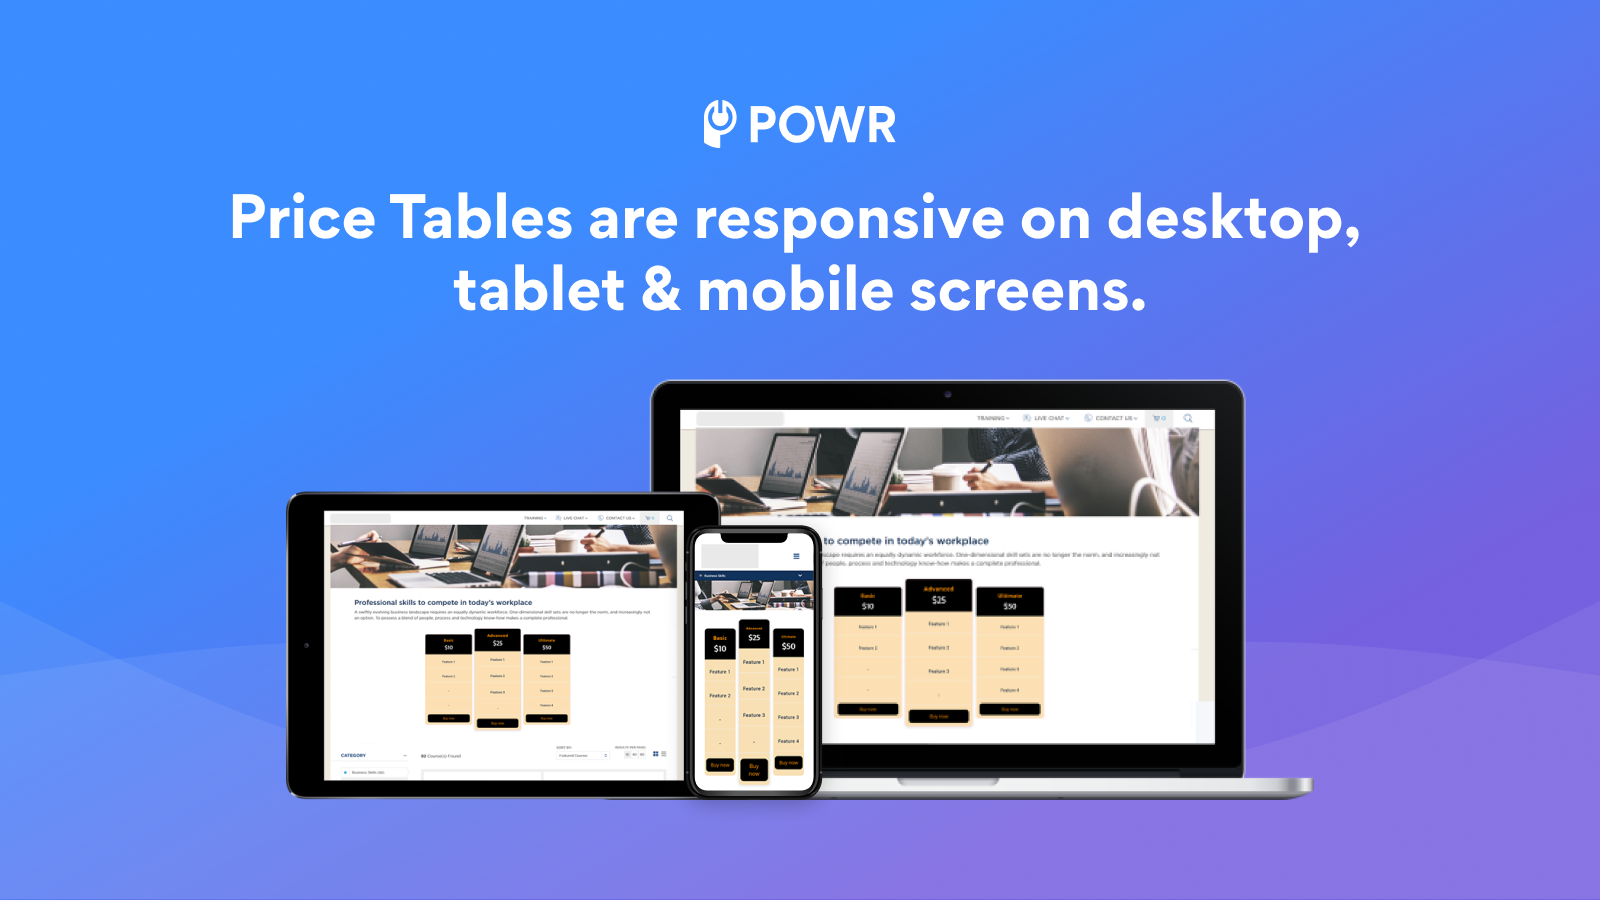 Price Table is responsive on desktop, tablet & mobile.